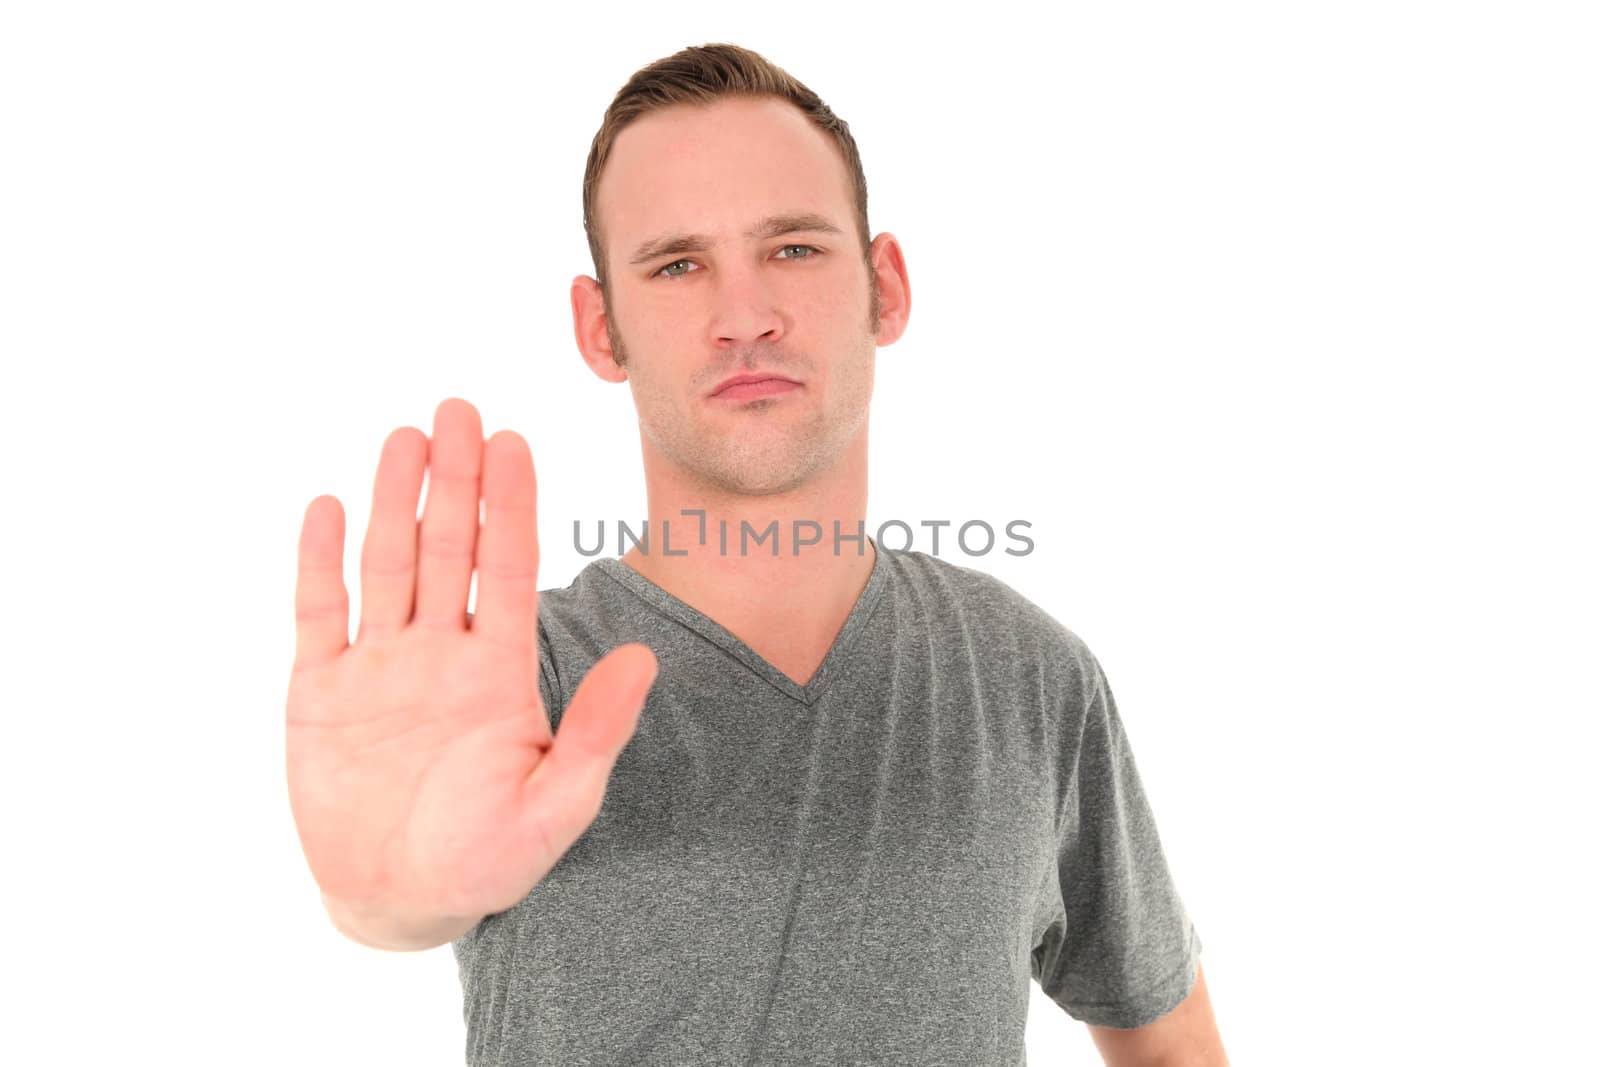 Man making a Stop gesture displaying the palm of his hand to the camera with a determined expression on his face isolated on white